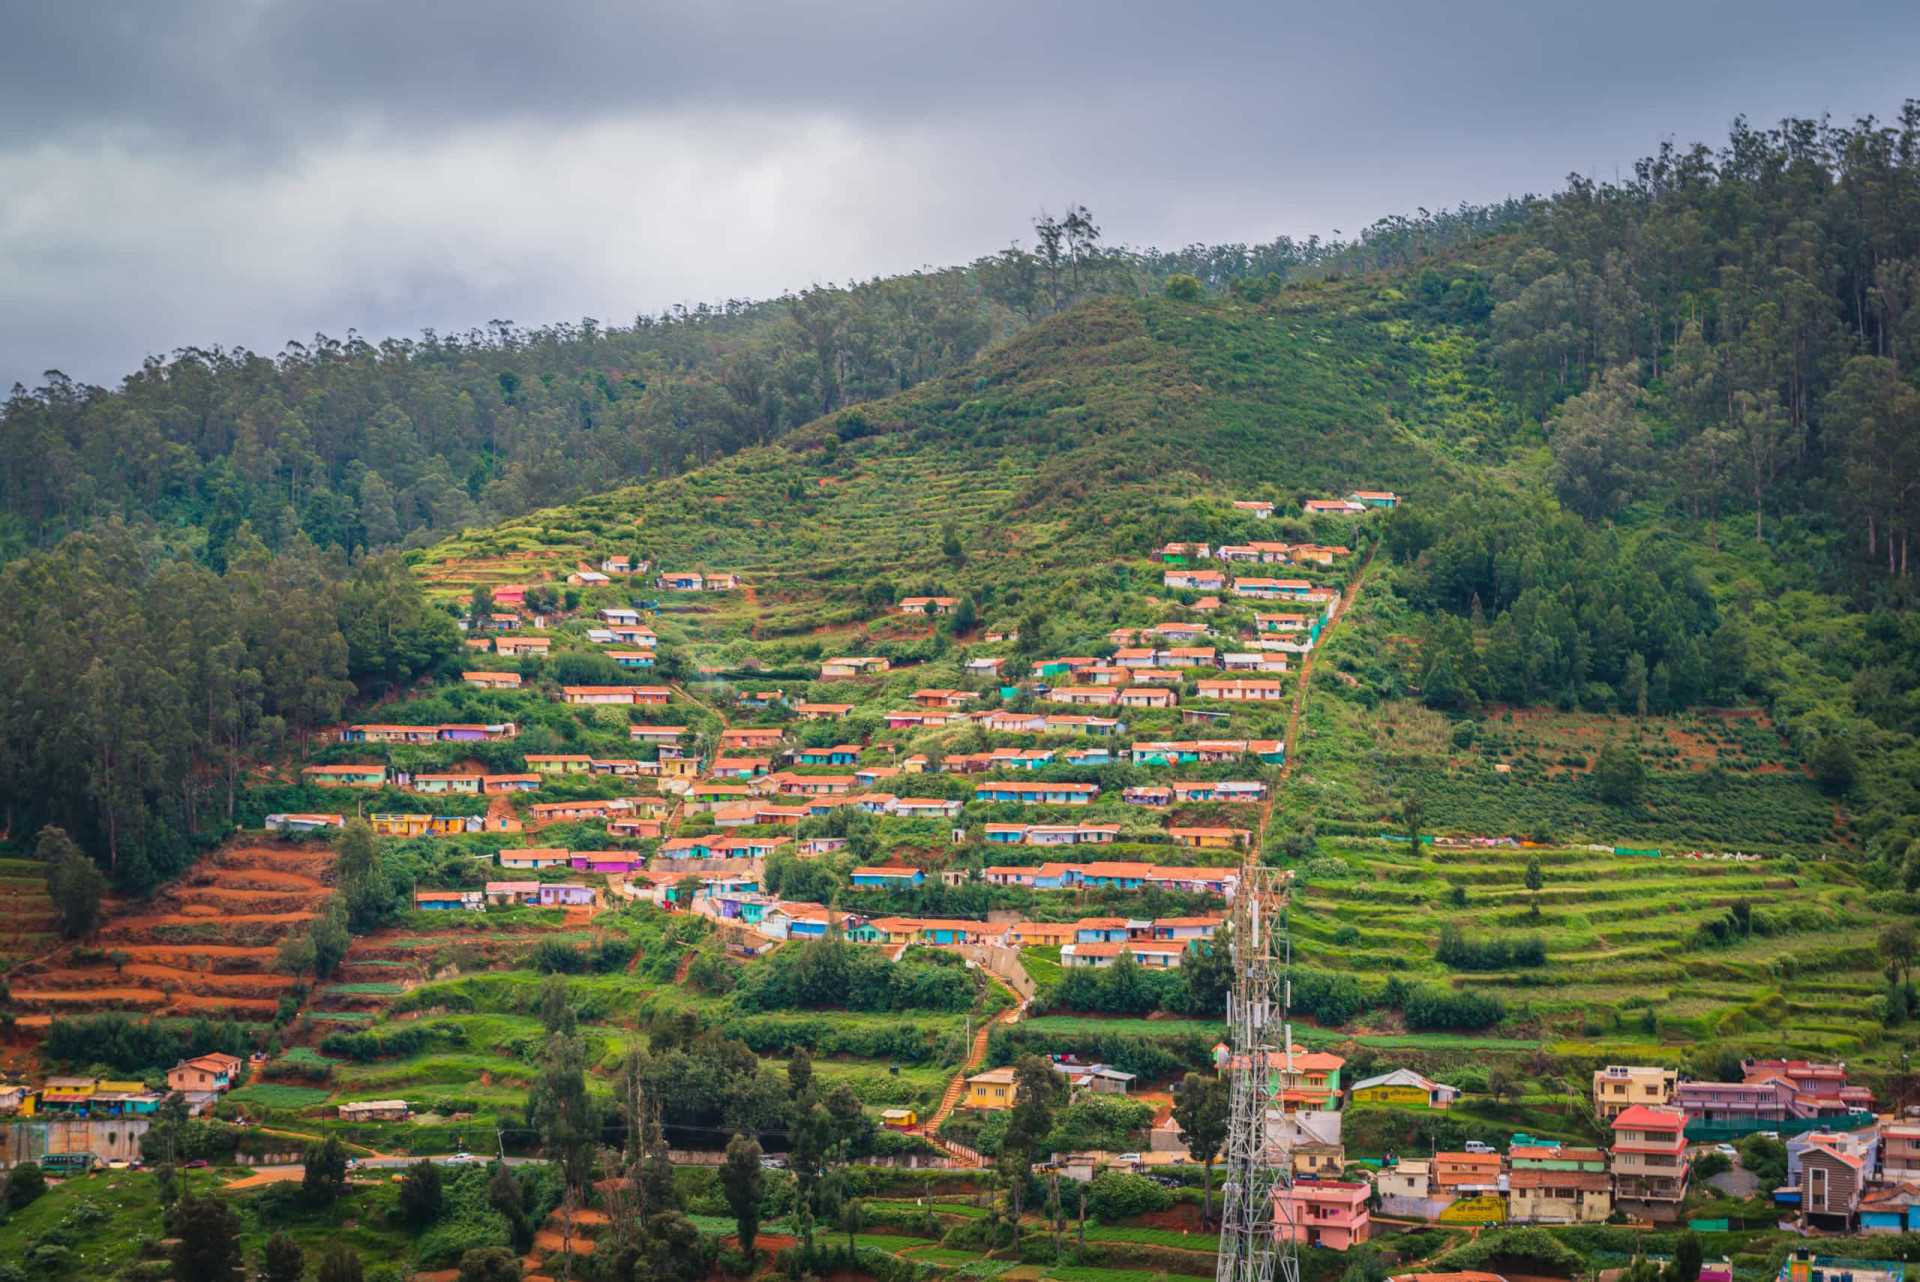 <p>High-altitude Ooty is a popular hill station located in the Nilgiri Hills in the state of Tamil Nadu. A visual treat, Ooty surprises with its colorful cottages and spruce botanical gardens. The town is connected by the Nilgiri ghat roads and Nilgiri Mountain Railway.</p><p>You may also like:<a href="https://www.starsinsider.com/n/388575?utm_source=msn.com&utm_medium=display&utm_campaign=referral_description&utm_content=470081v2en-en"> Trust issues: crazy celebrity prenups</a></p>